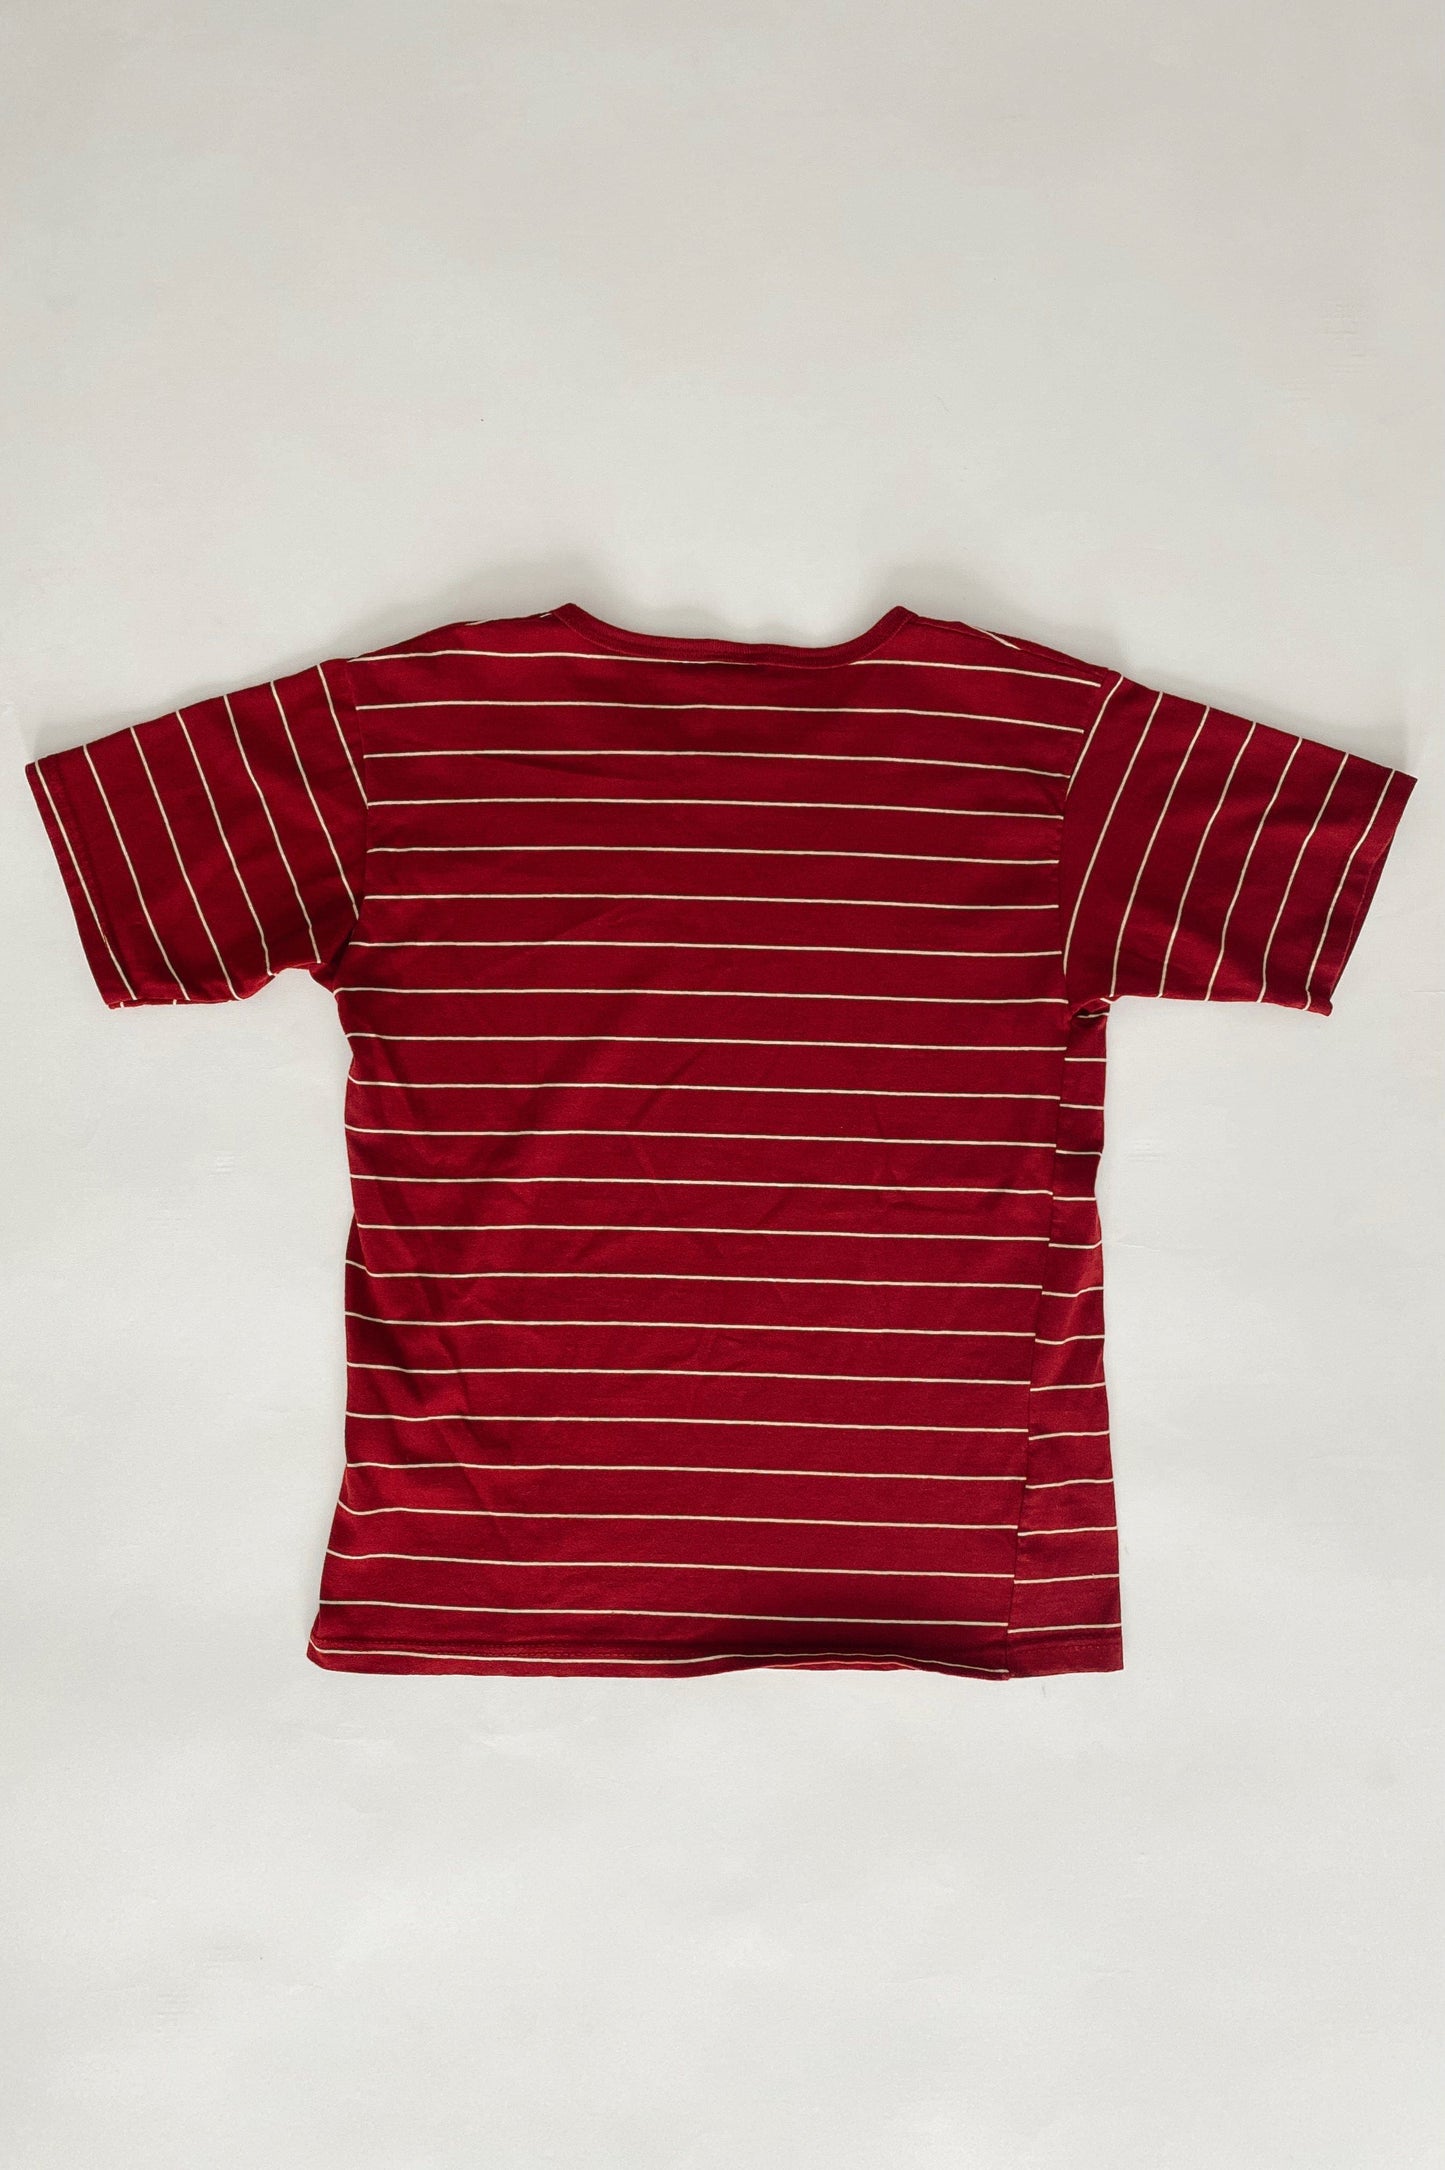 80s Vintage Florida State University Striped Tee / Made in USA / M